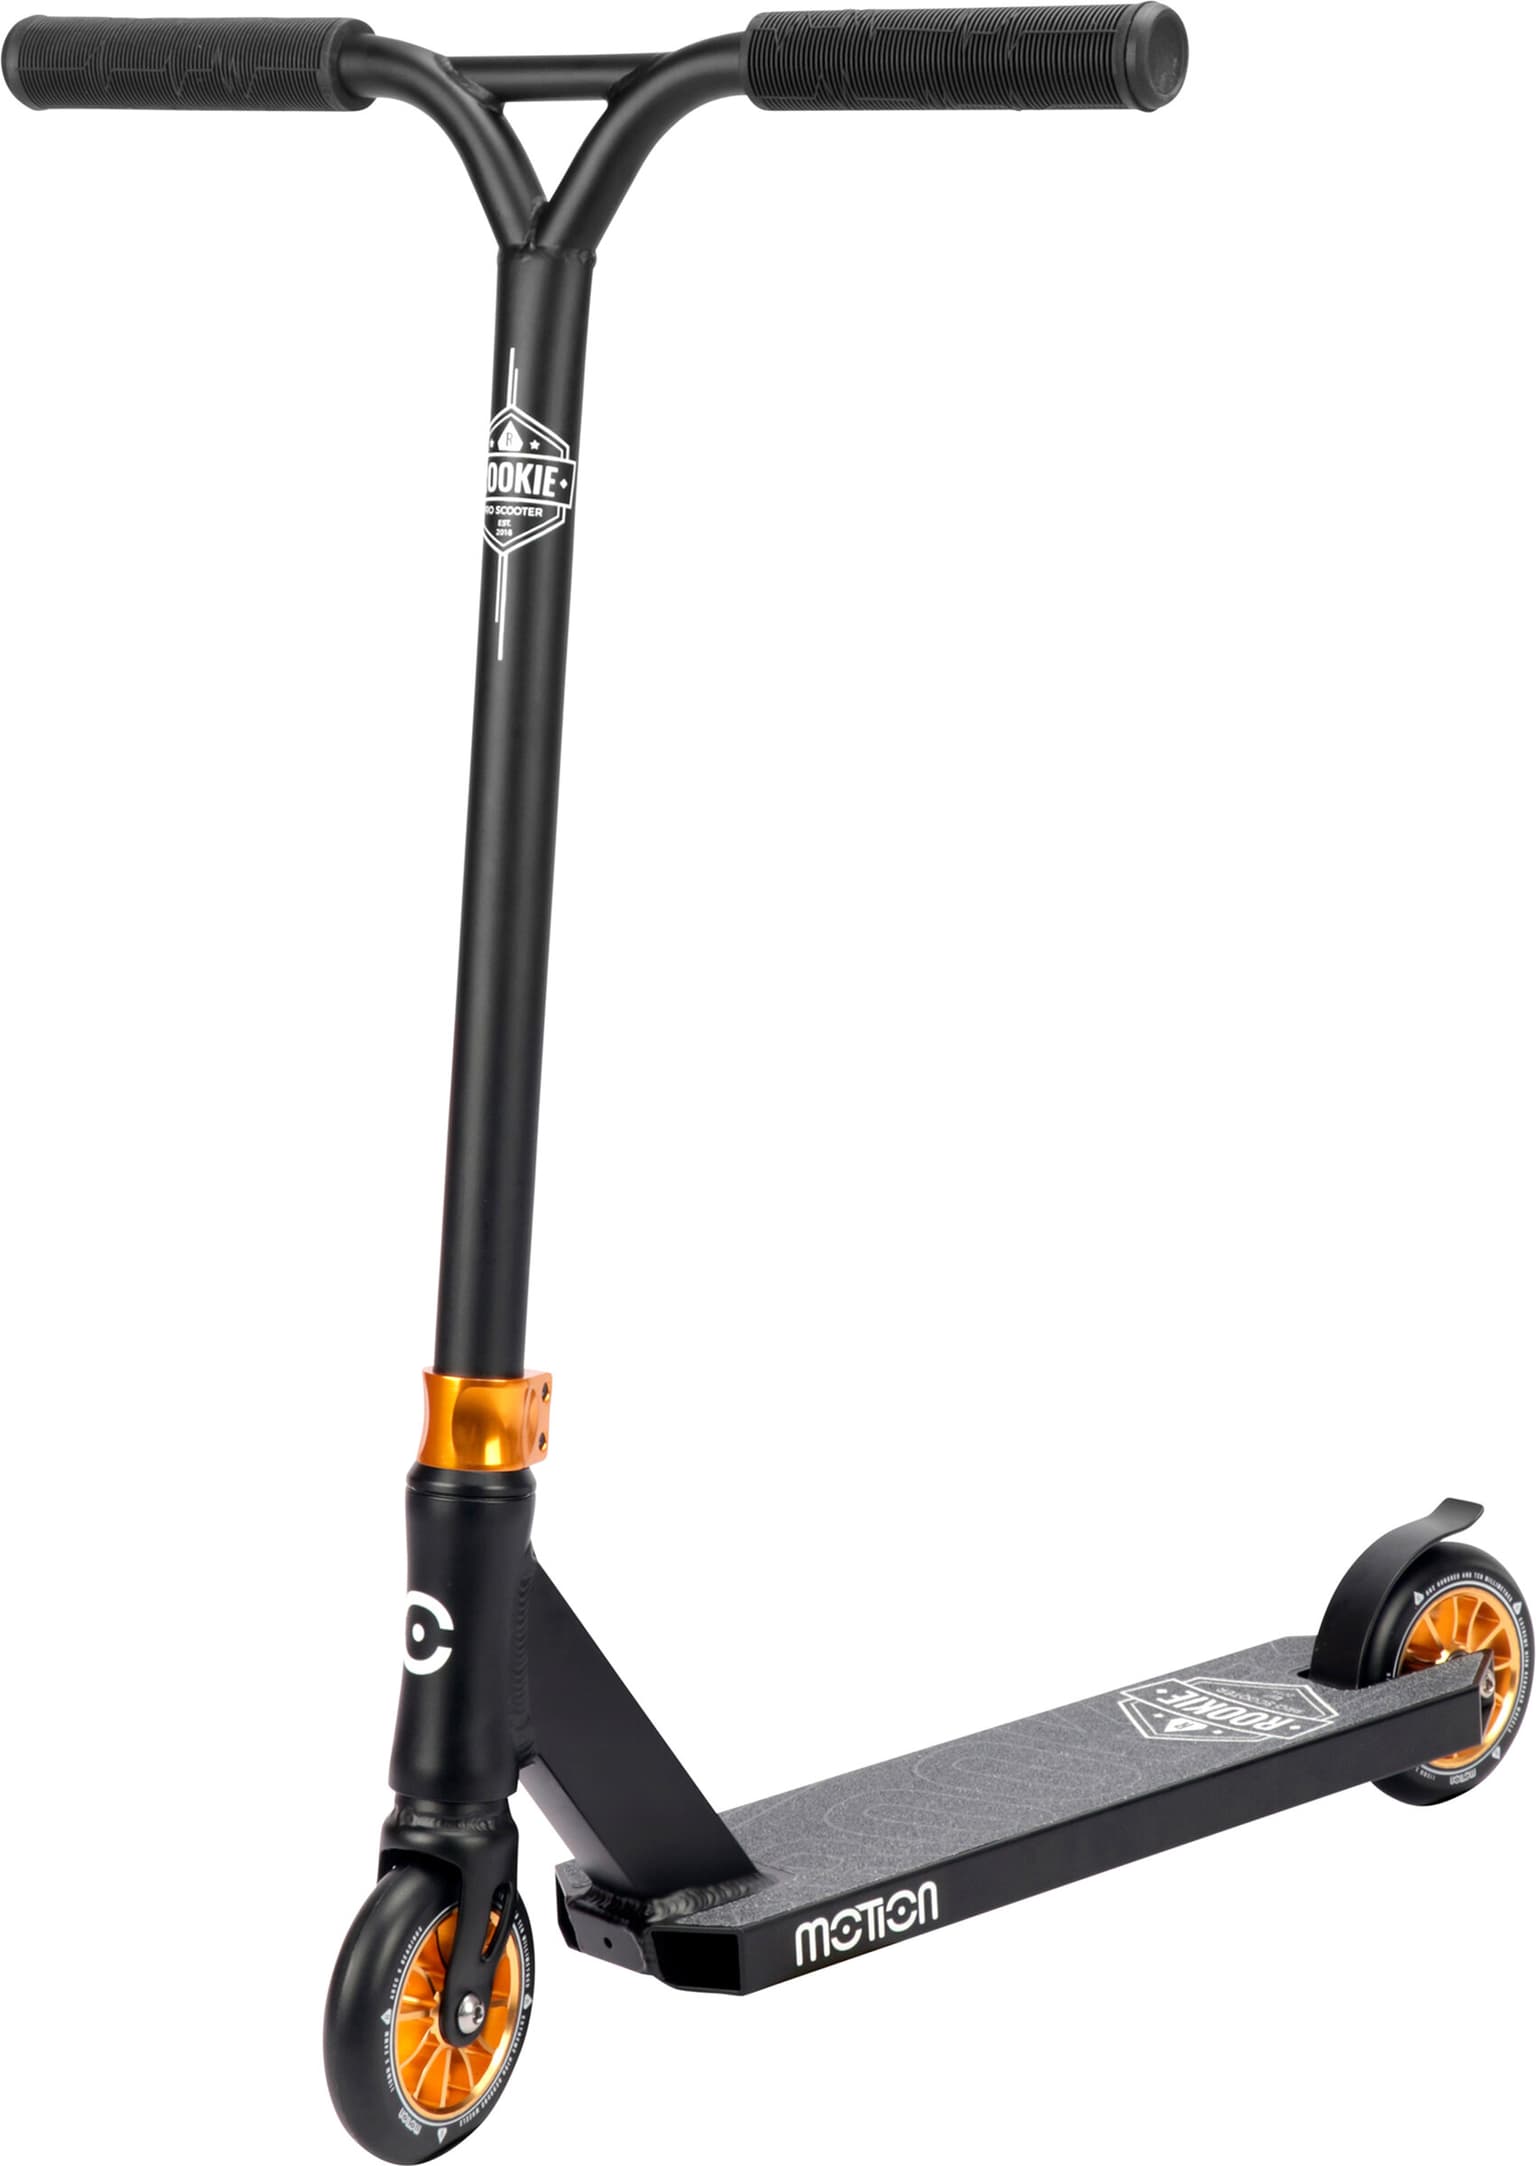 Motion Motion Rookie Pro Scooter goldfarben 1